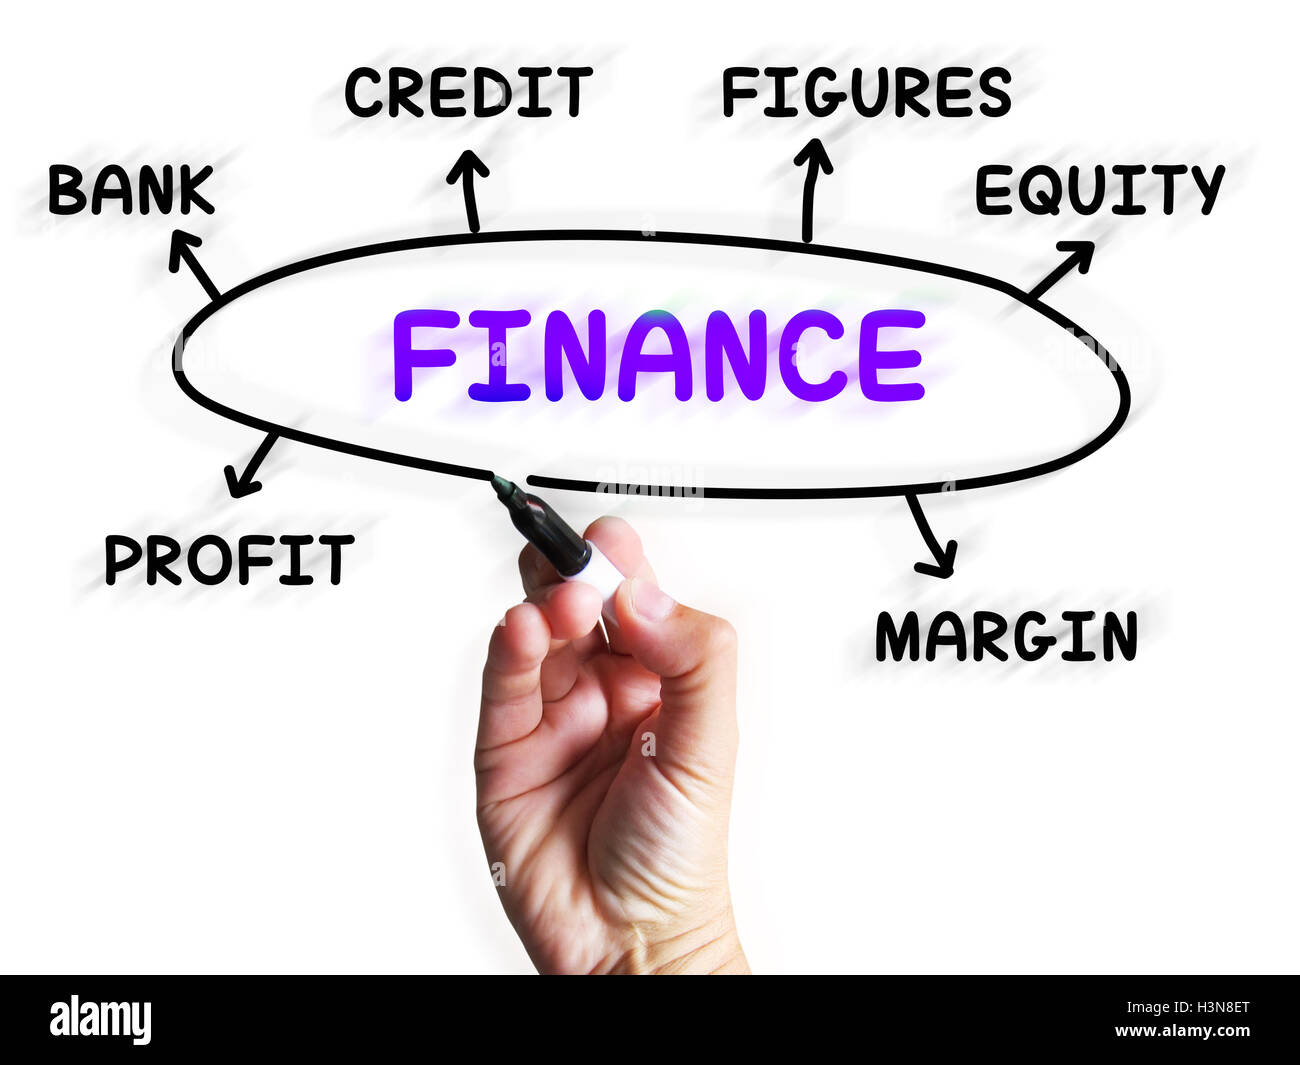 Finance Diagram Displays Credit Equity And Margin Stock Photo